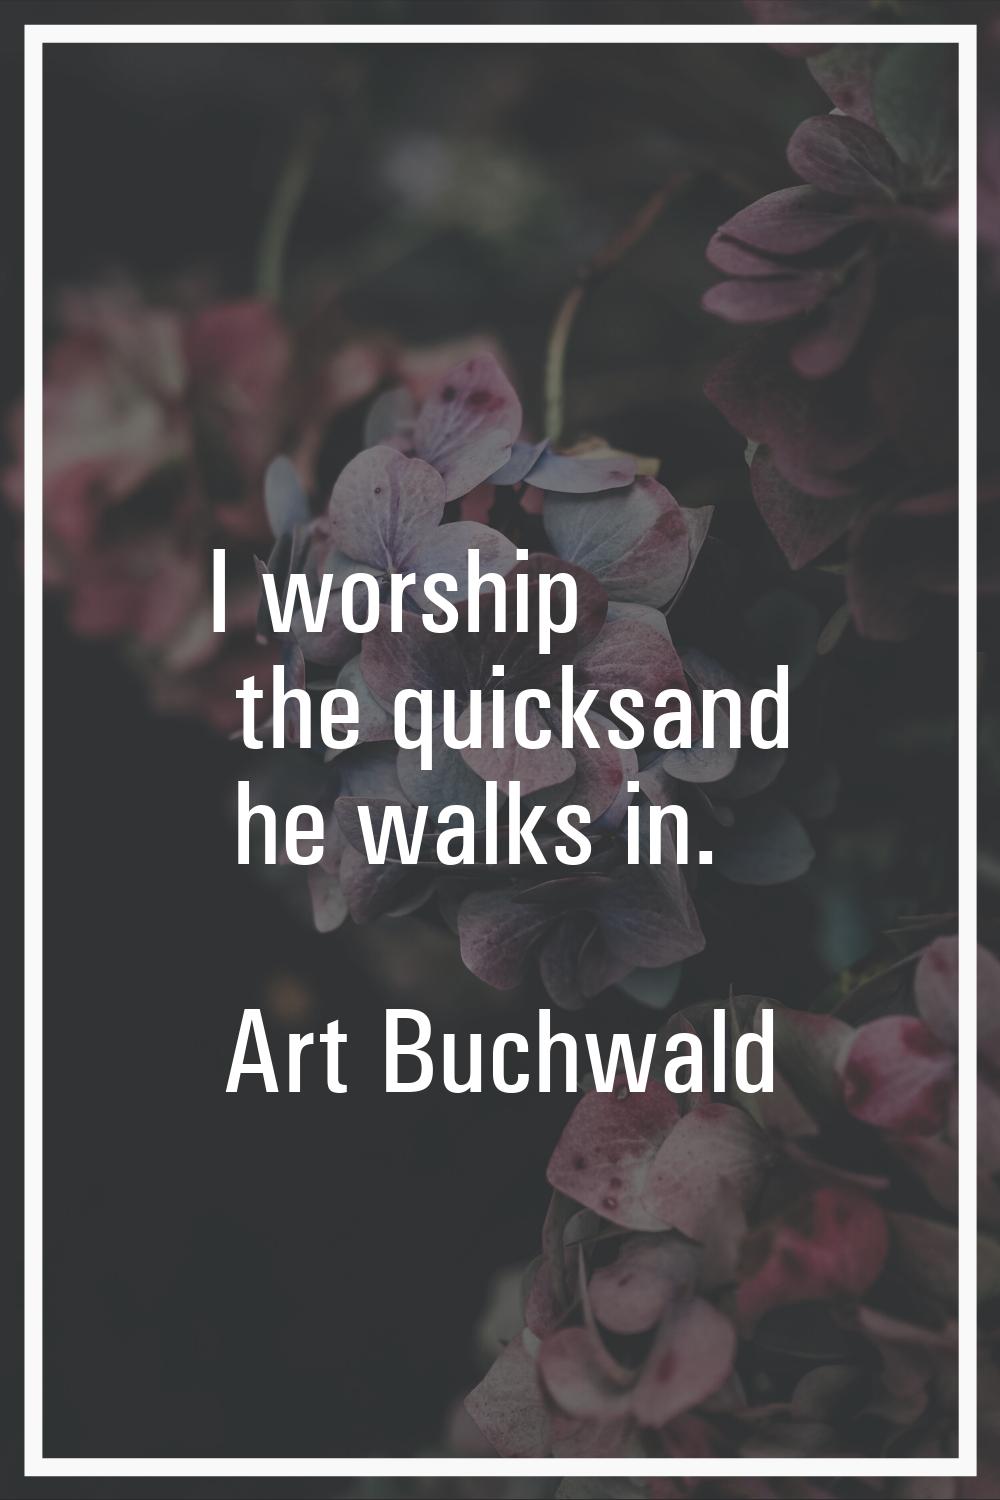 I worship the quicksand he walks in.